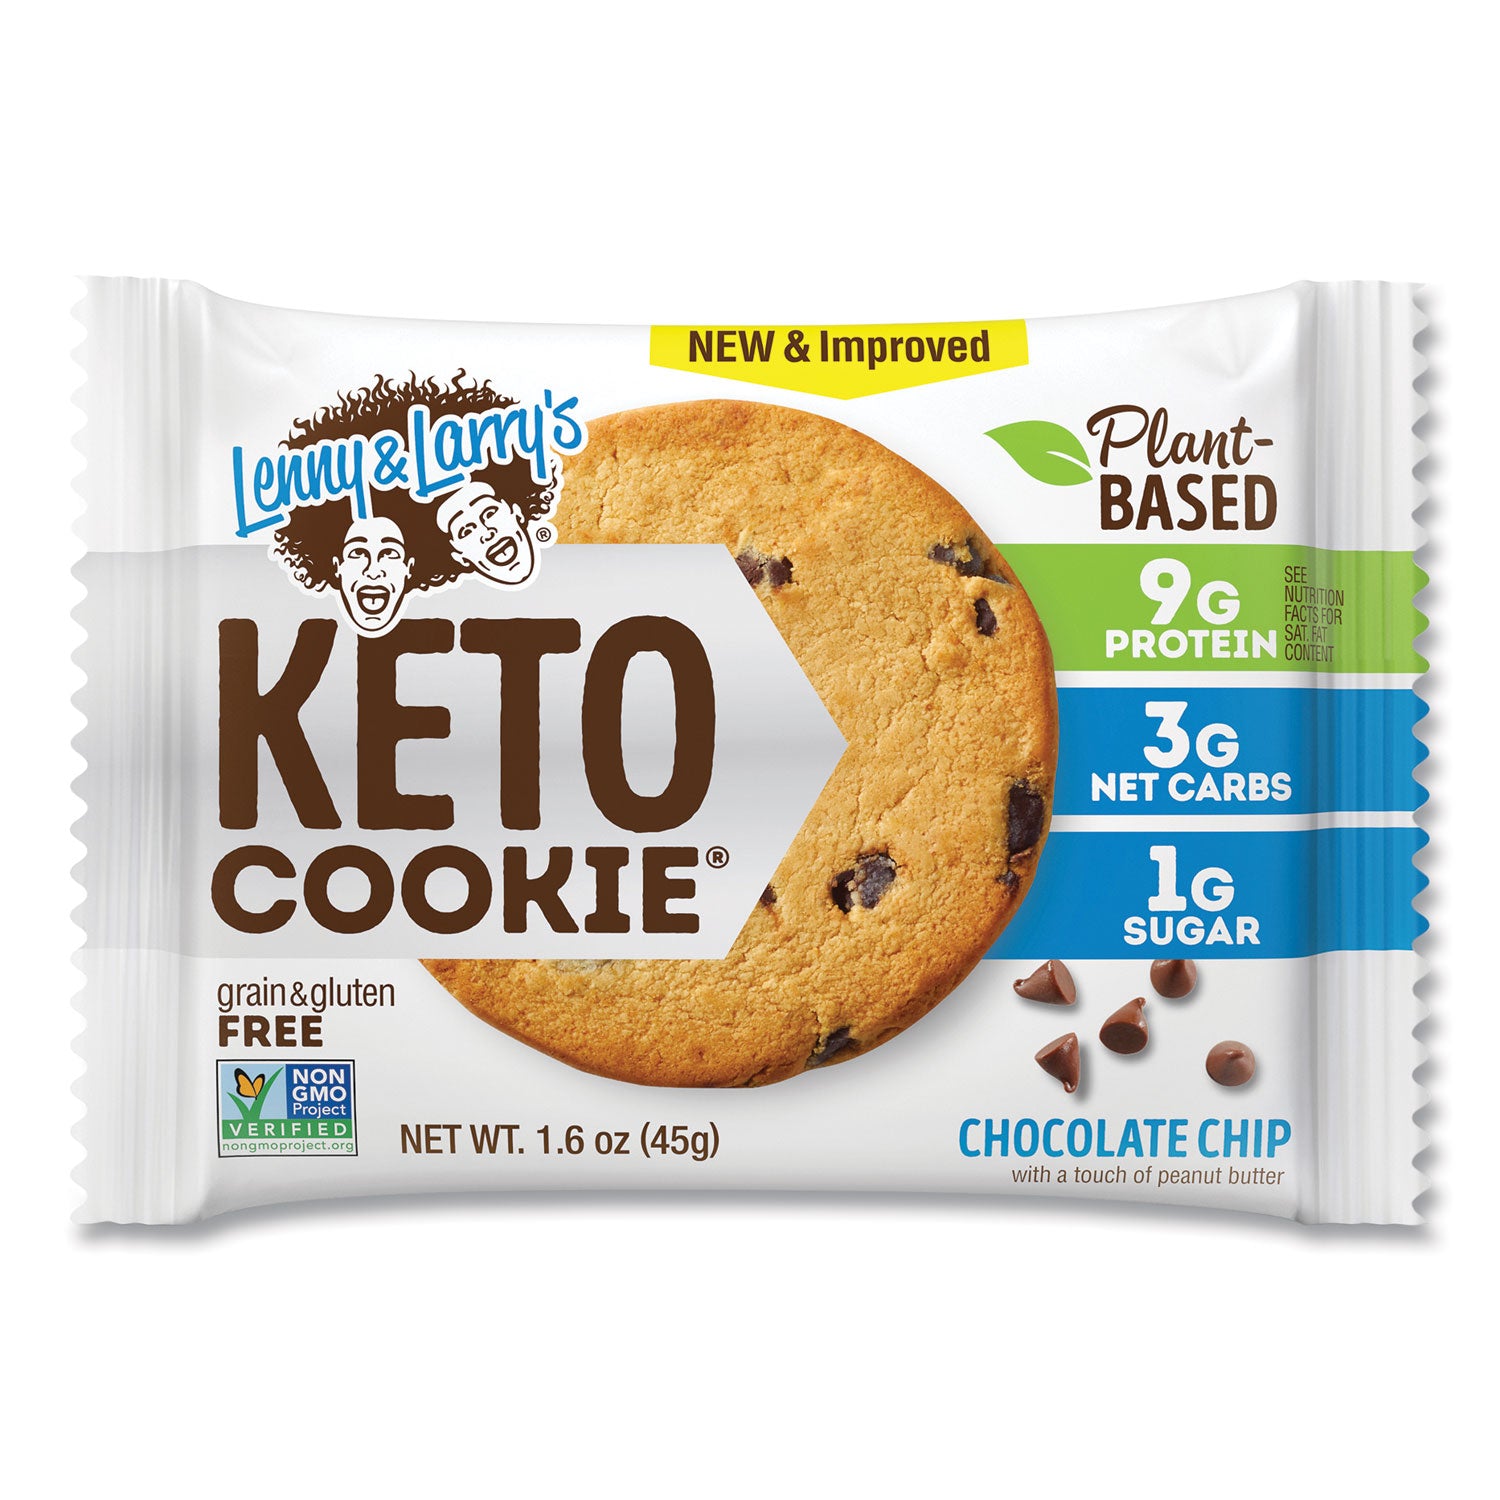 keto-chocolate-chip-cookie-chocolate-chip-16-oz-packet-12-pack-ships-in-1-3-business-days_grr22002083 - 2